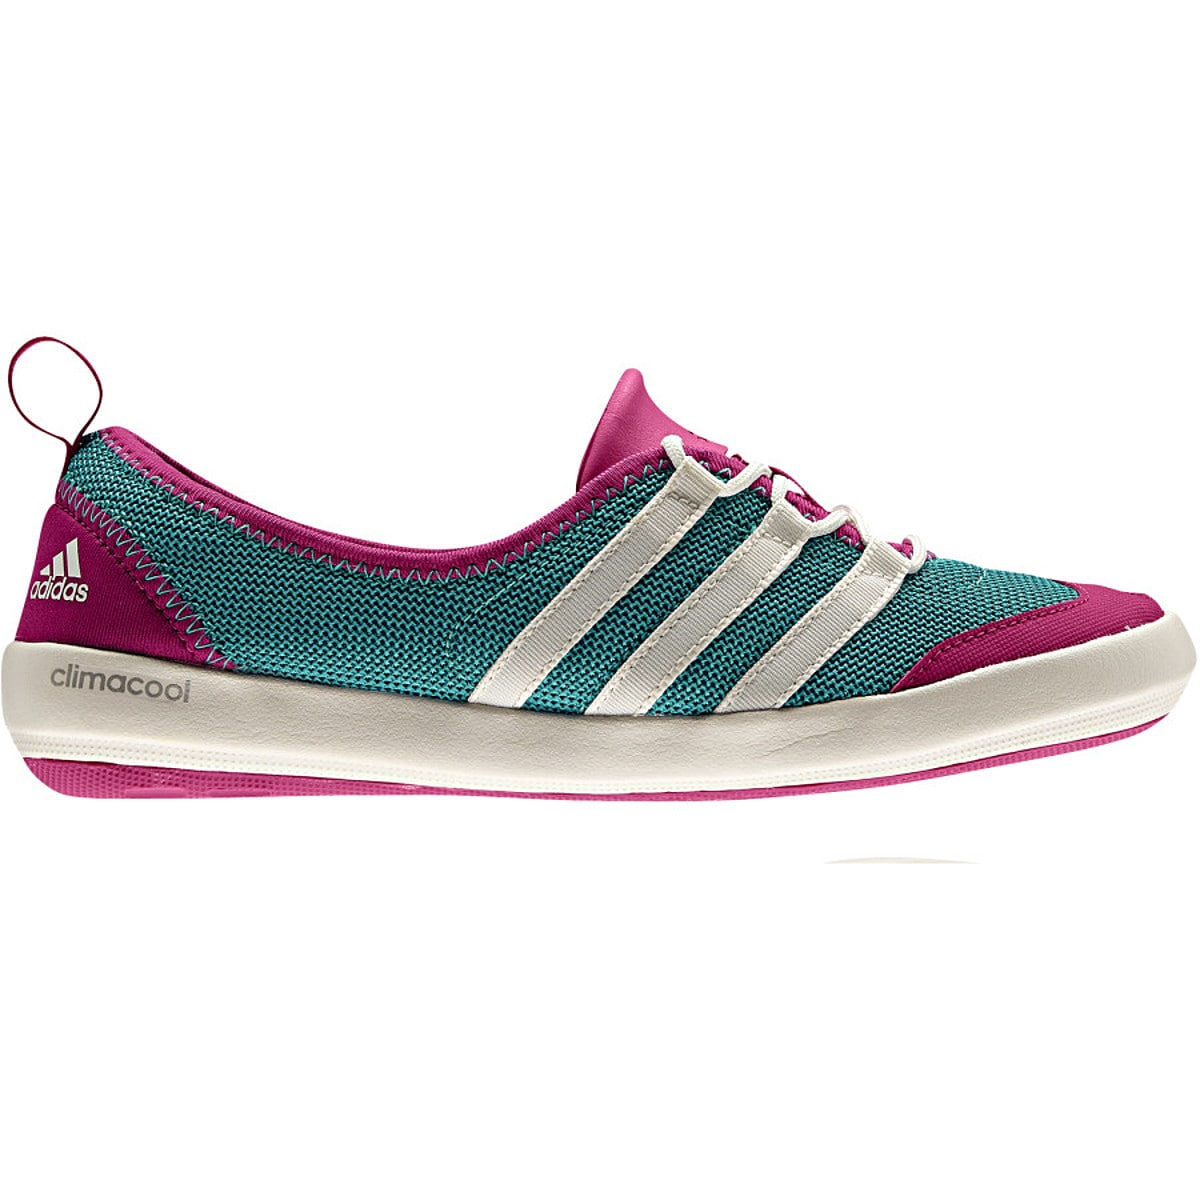 adidas boat climacool lace water shoe women's